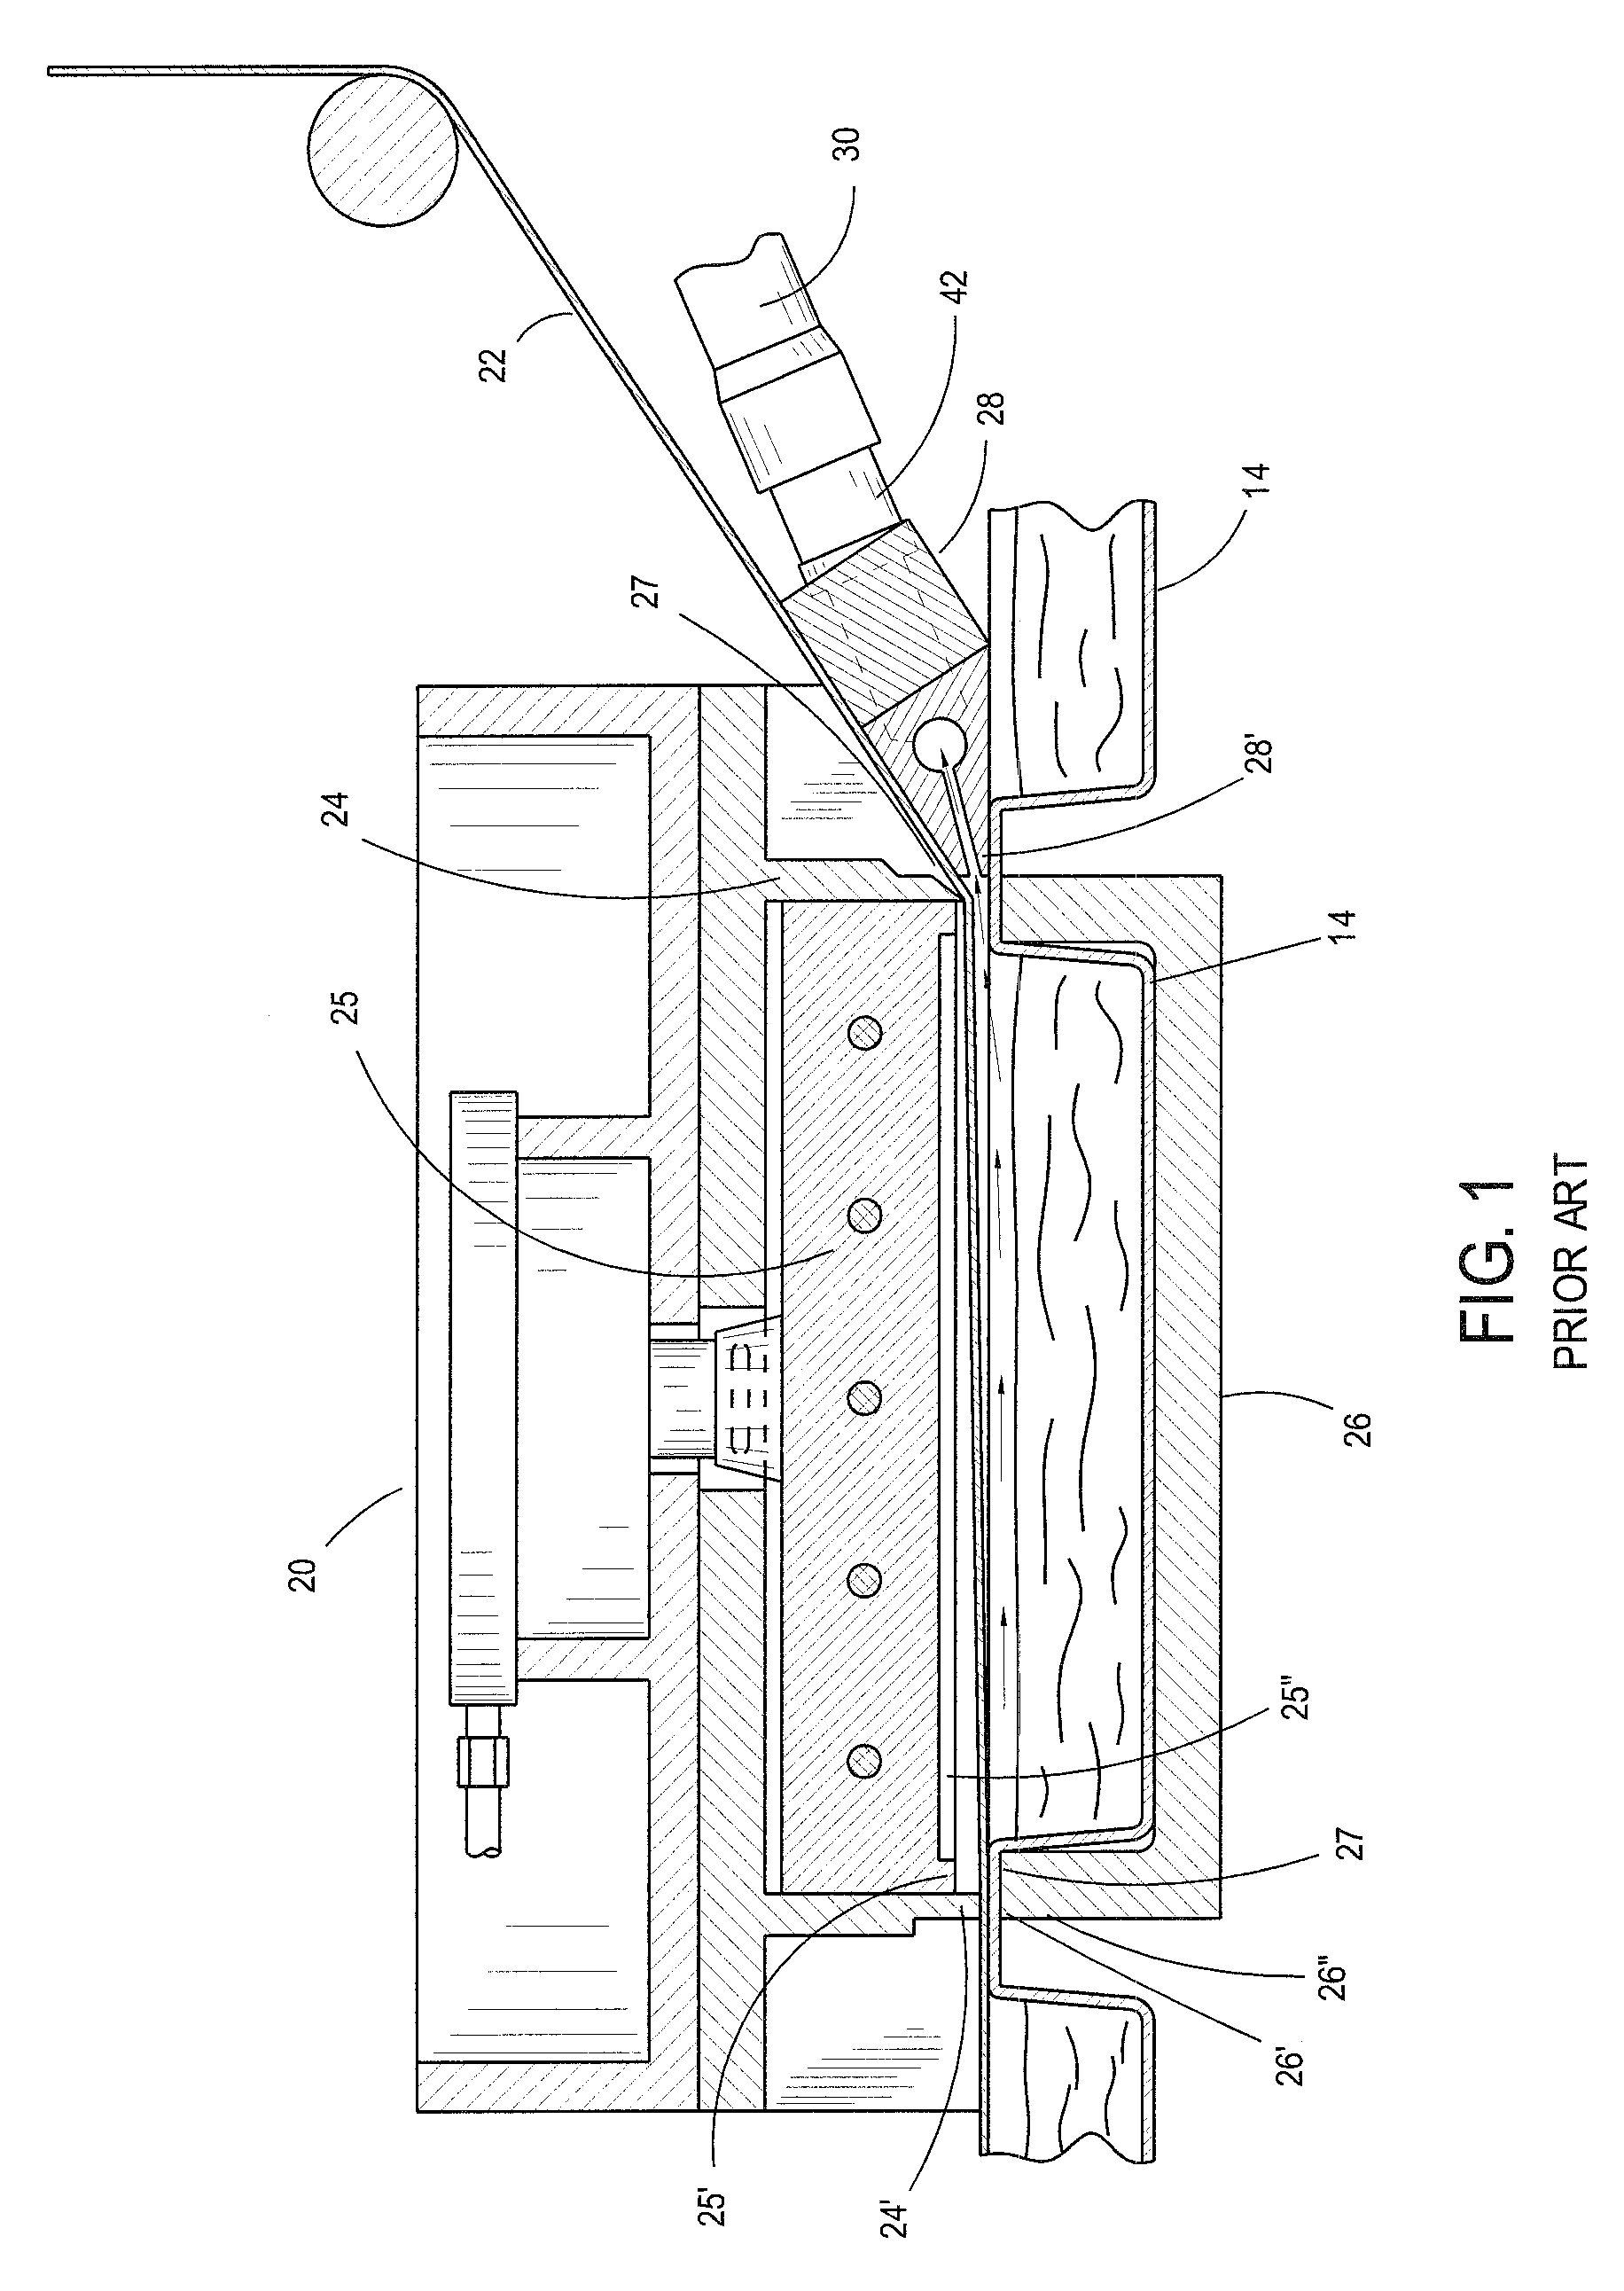 Sealing gasket for lower tool of a sealing station of a vacuum packaging machine